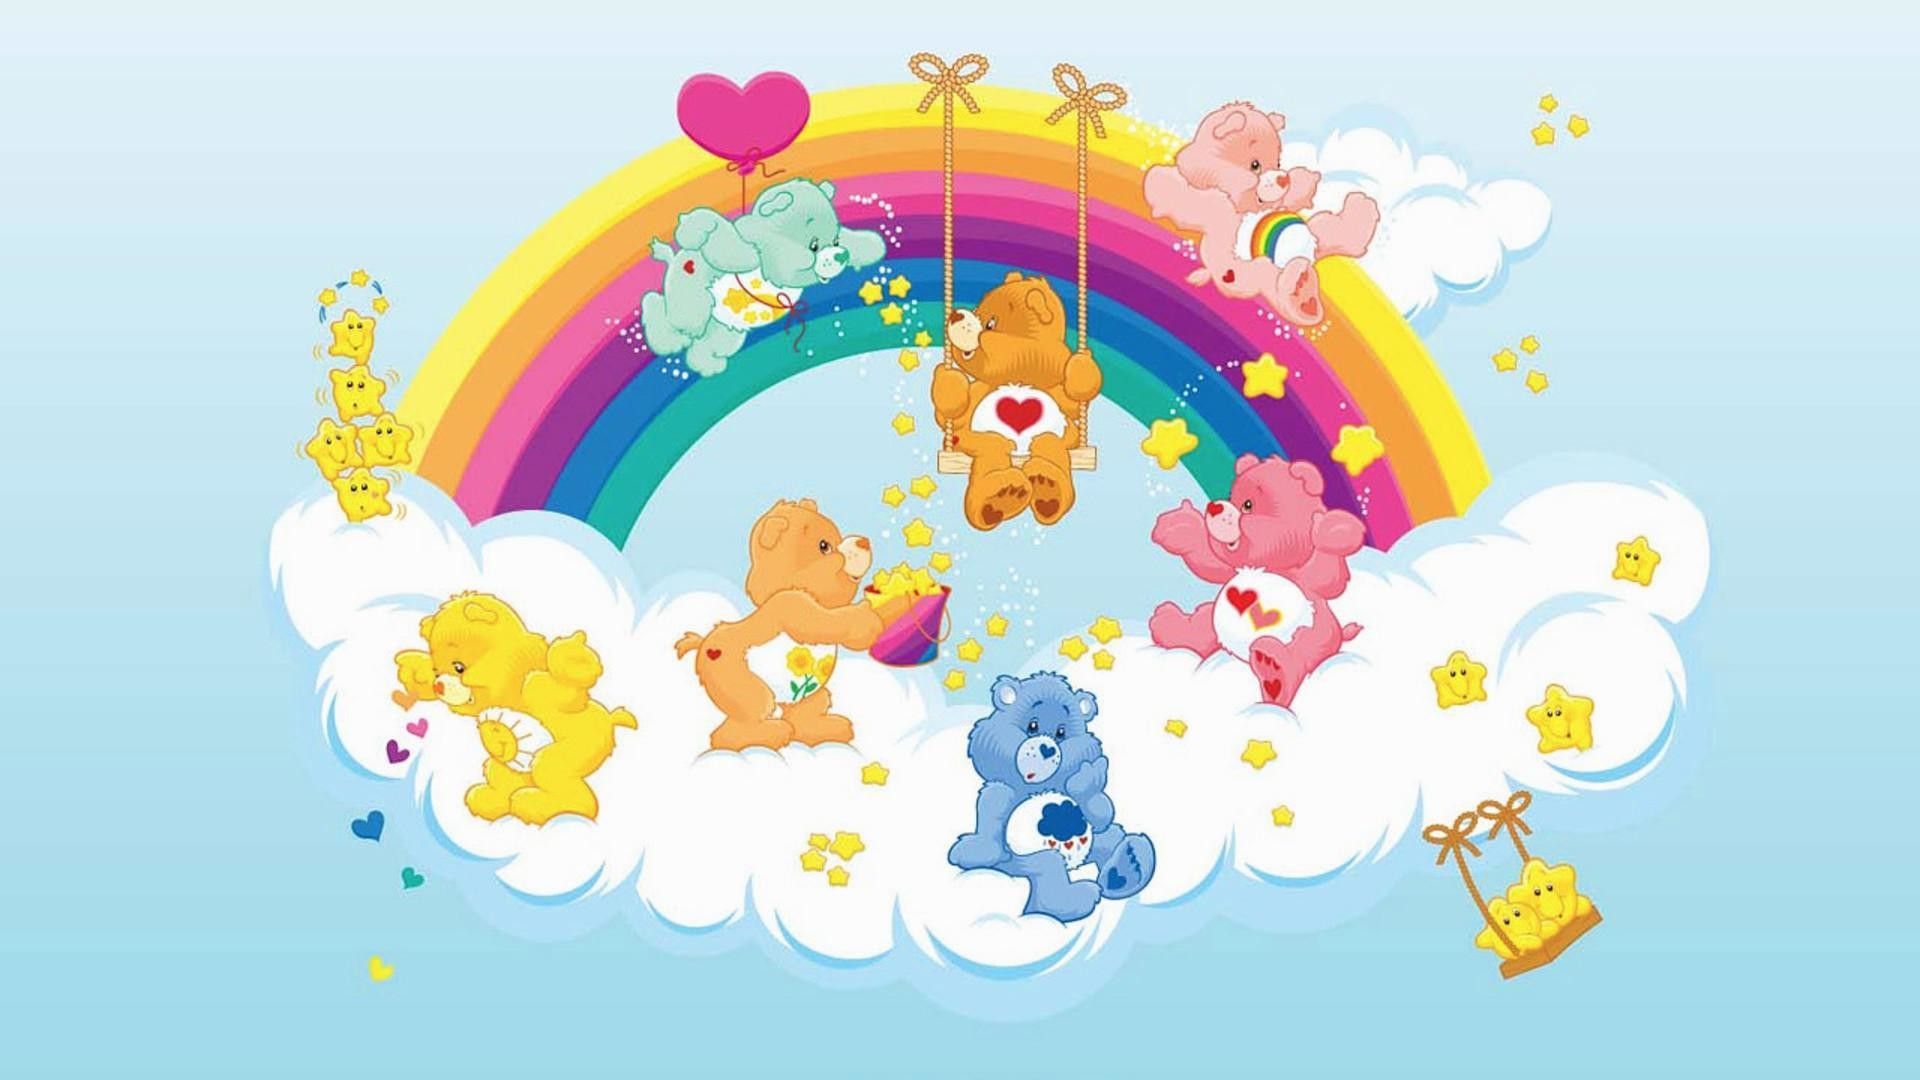 Discover more than 64 care bear wallpaper aesthetic latest - in.cdgdbentre